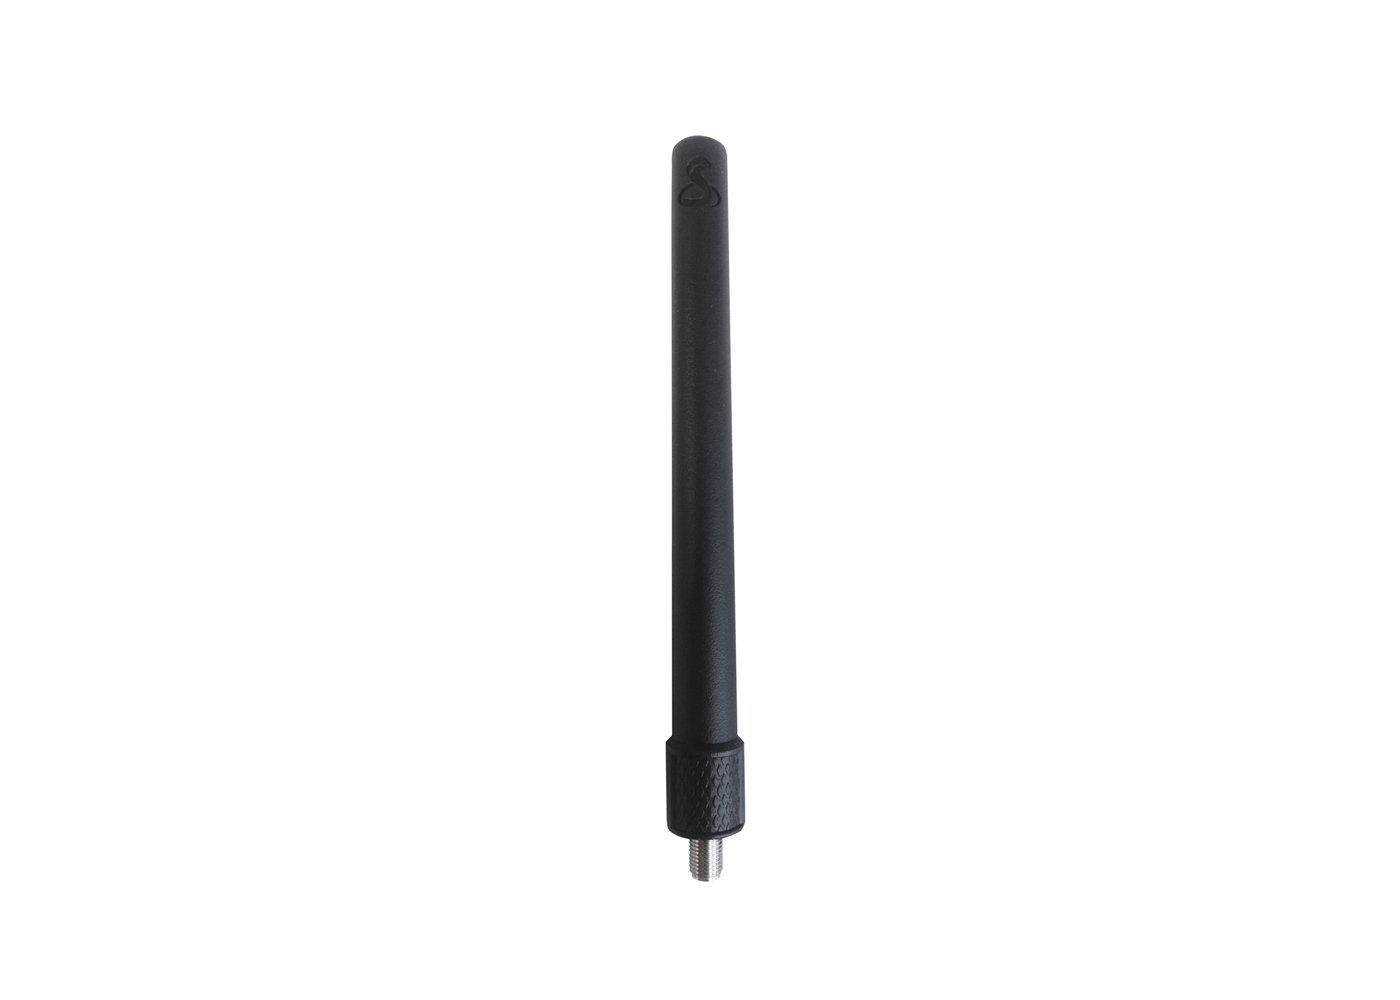 Replacement antenna for HH350/350W/500/600/600W